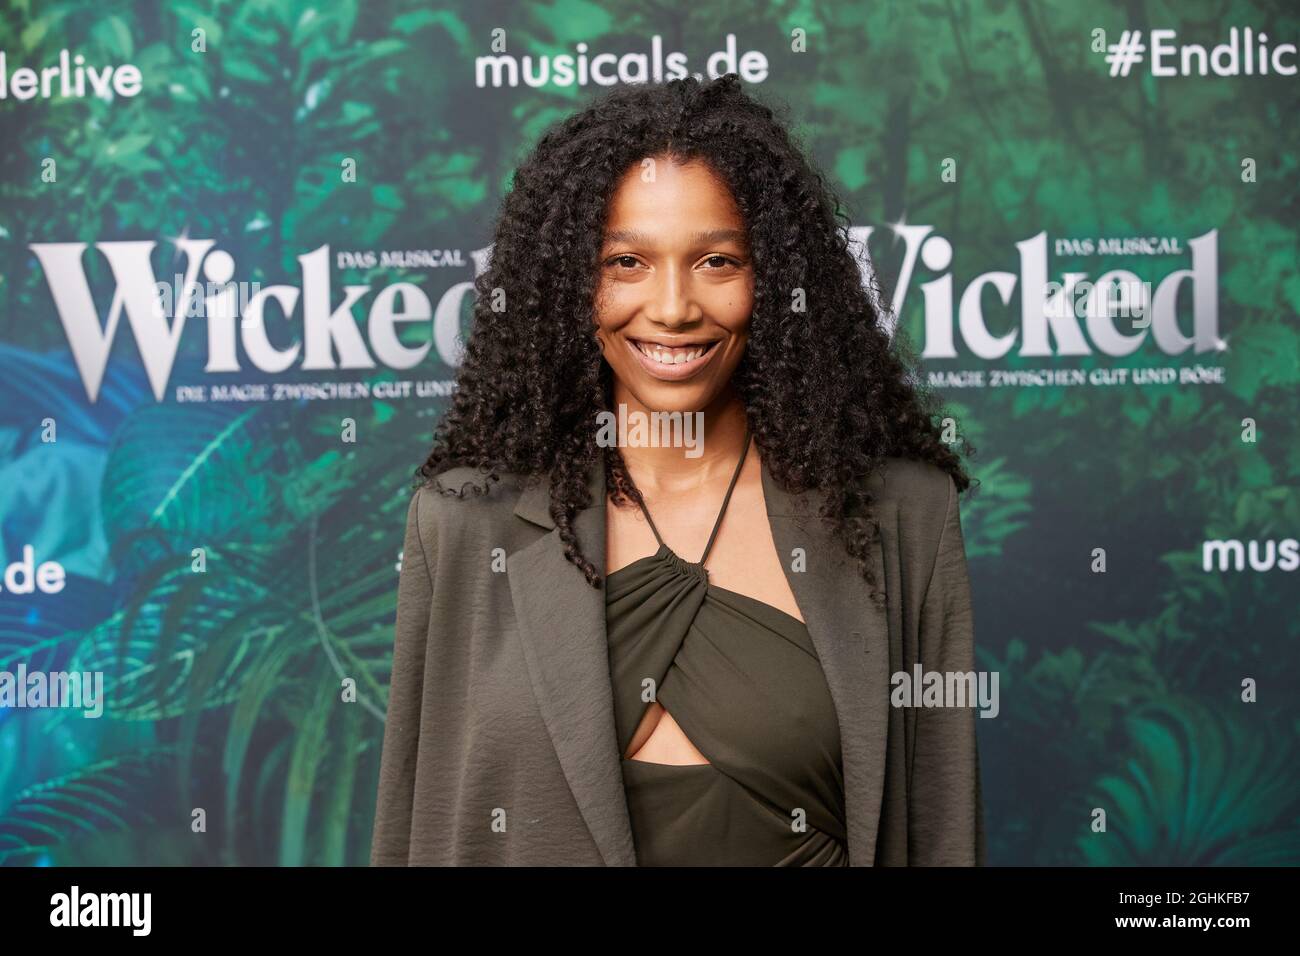 Hamburg, Germany. 05th Sep, 2021. Shari Streich, actress, arrives at the premiere of the musical 'Wicked' at Stage Theater Neue Flora. With the new production of the Broadway musical, Stage Entertainment opened its first theater after the one-and-a-half-year Corona break. Credit: Georg Wendt/dpa/Alamy Live News Stock Photo